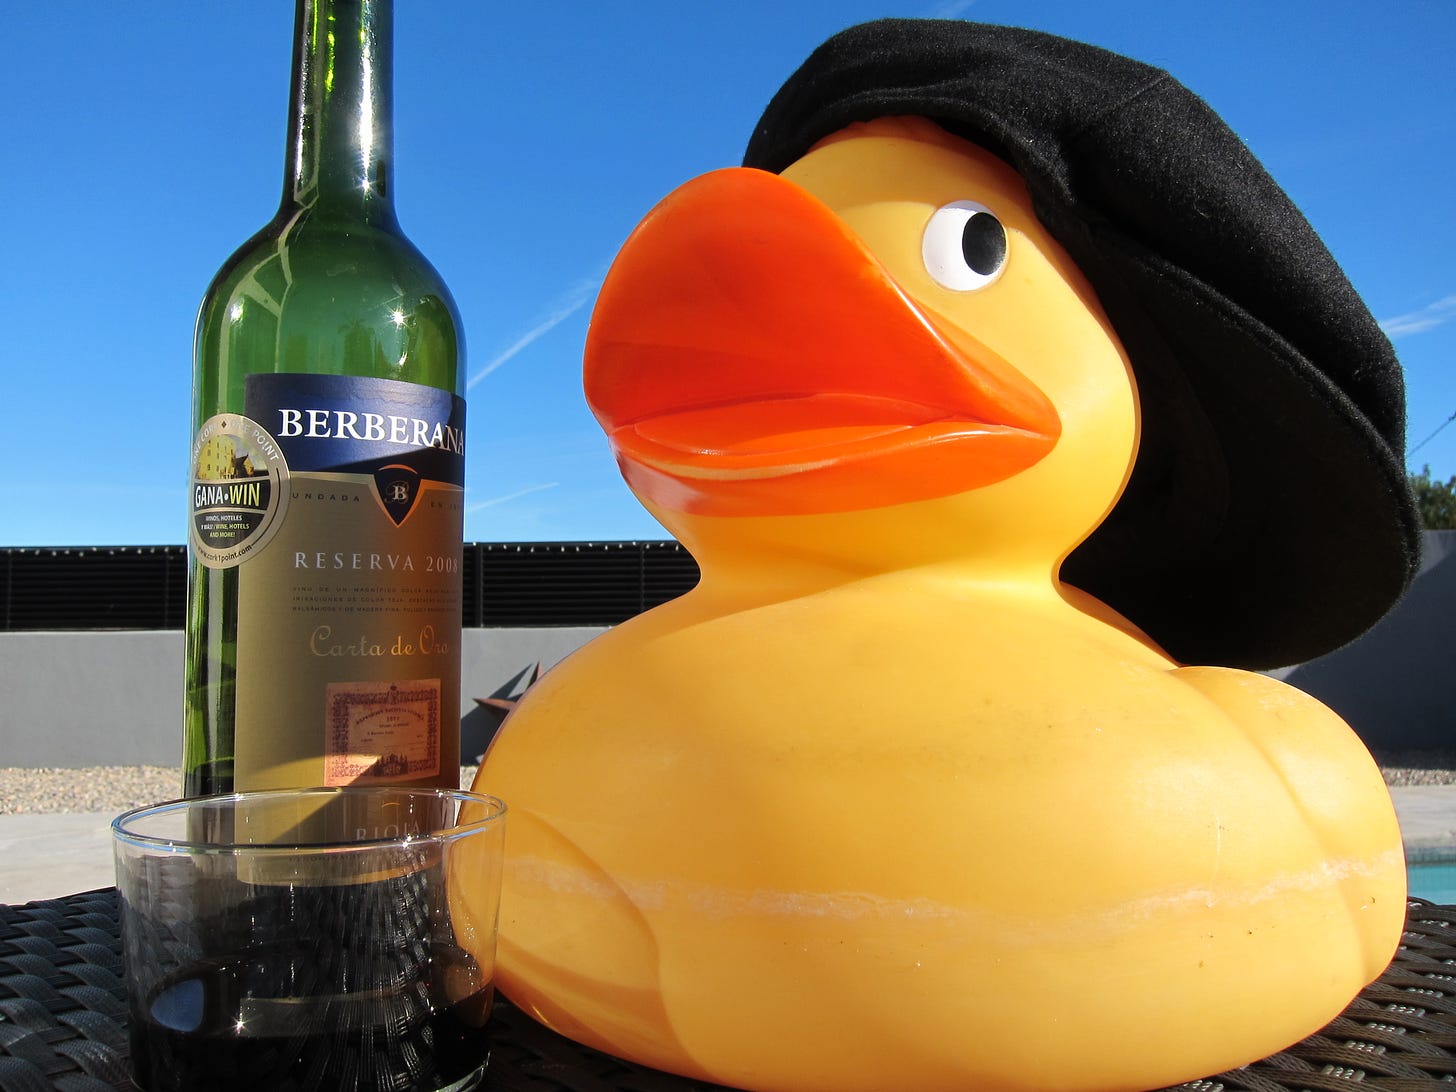 A rubber duck, a glass and bottle of red wine. That's Happiness in Halos.